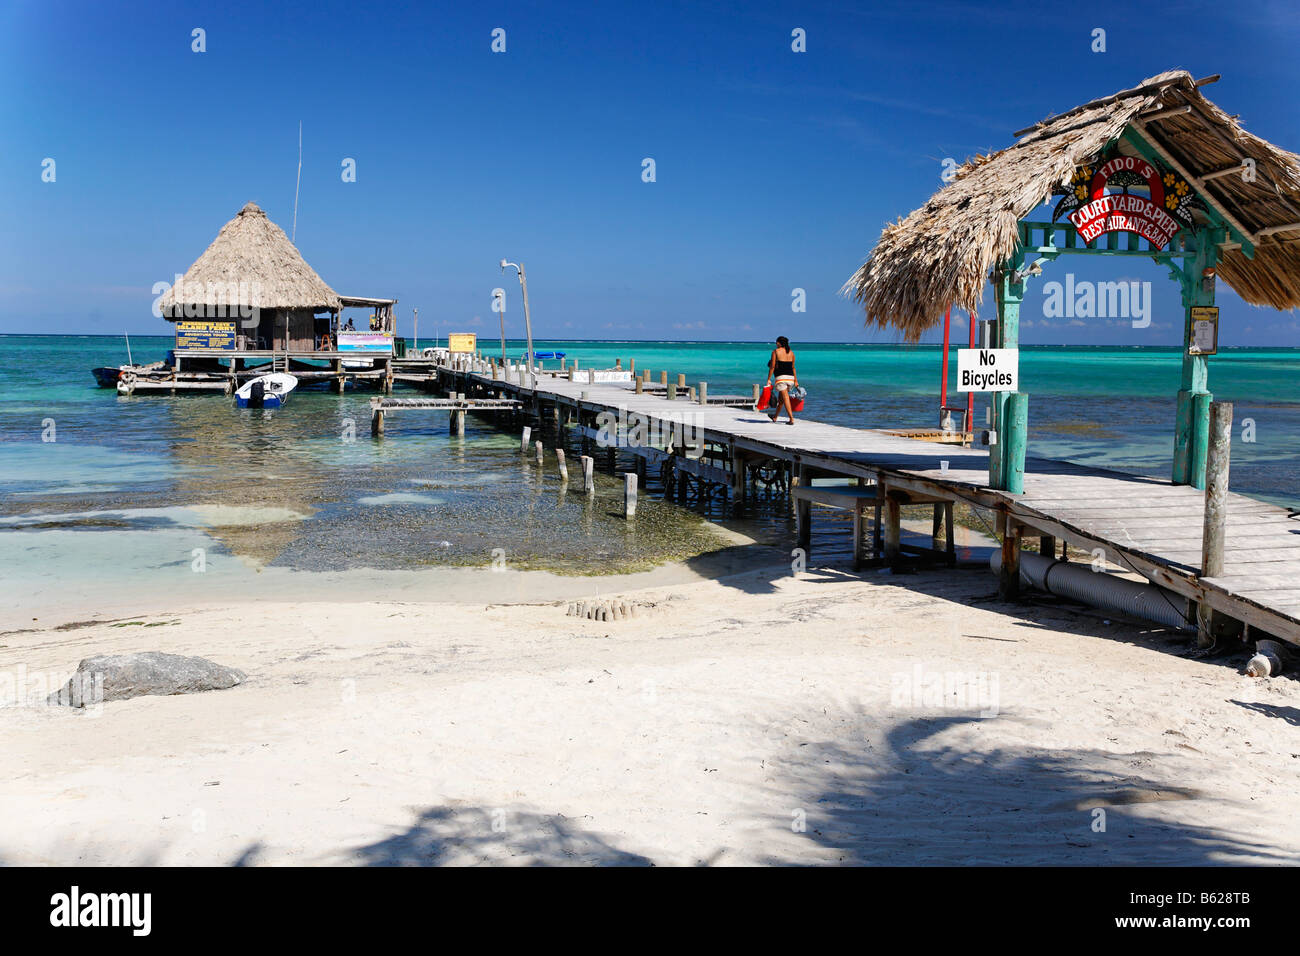 Restaurant at the end of a pier in the ocean of San Pedro, Ambergris Cay Island, Belize, Central America, Caribbean Stock Photo